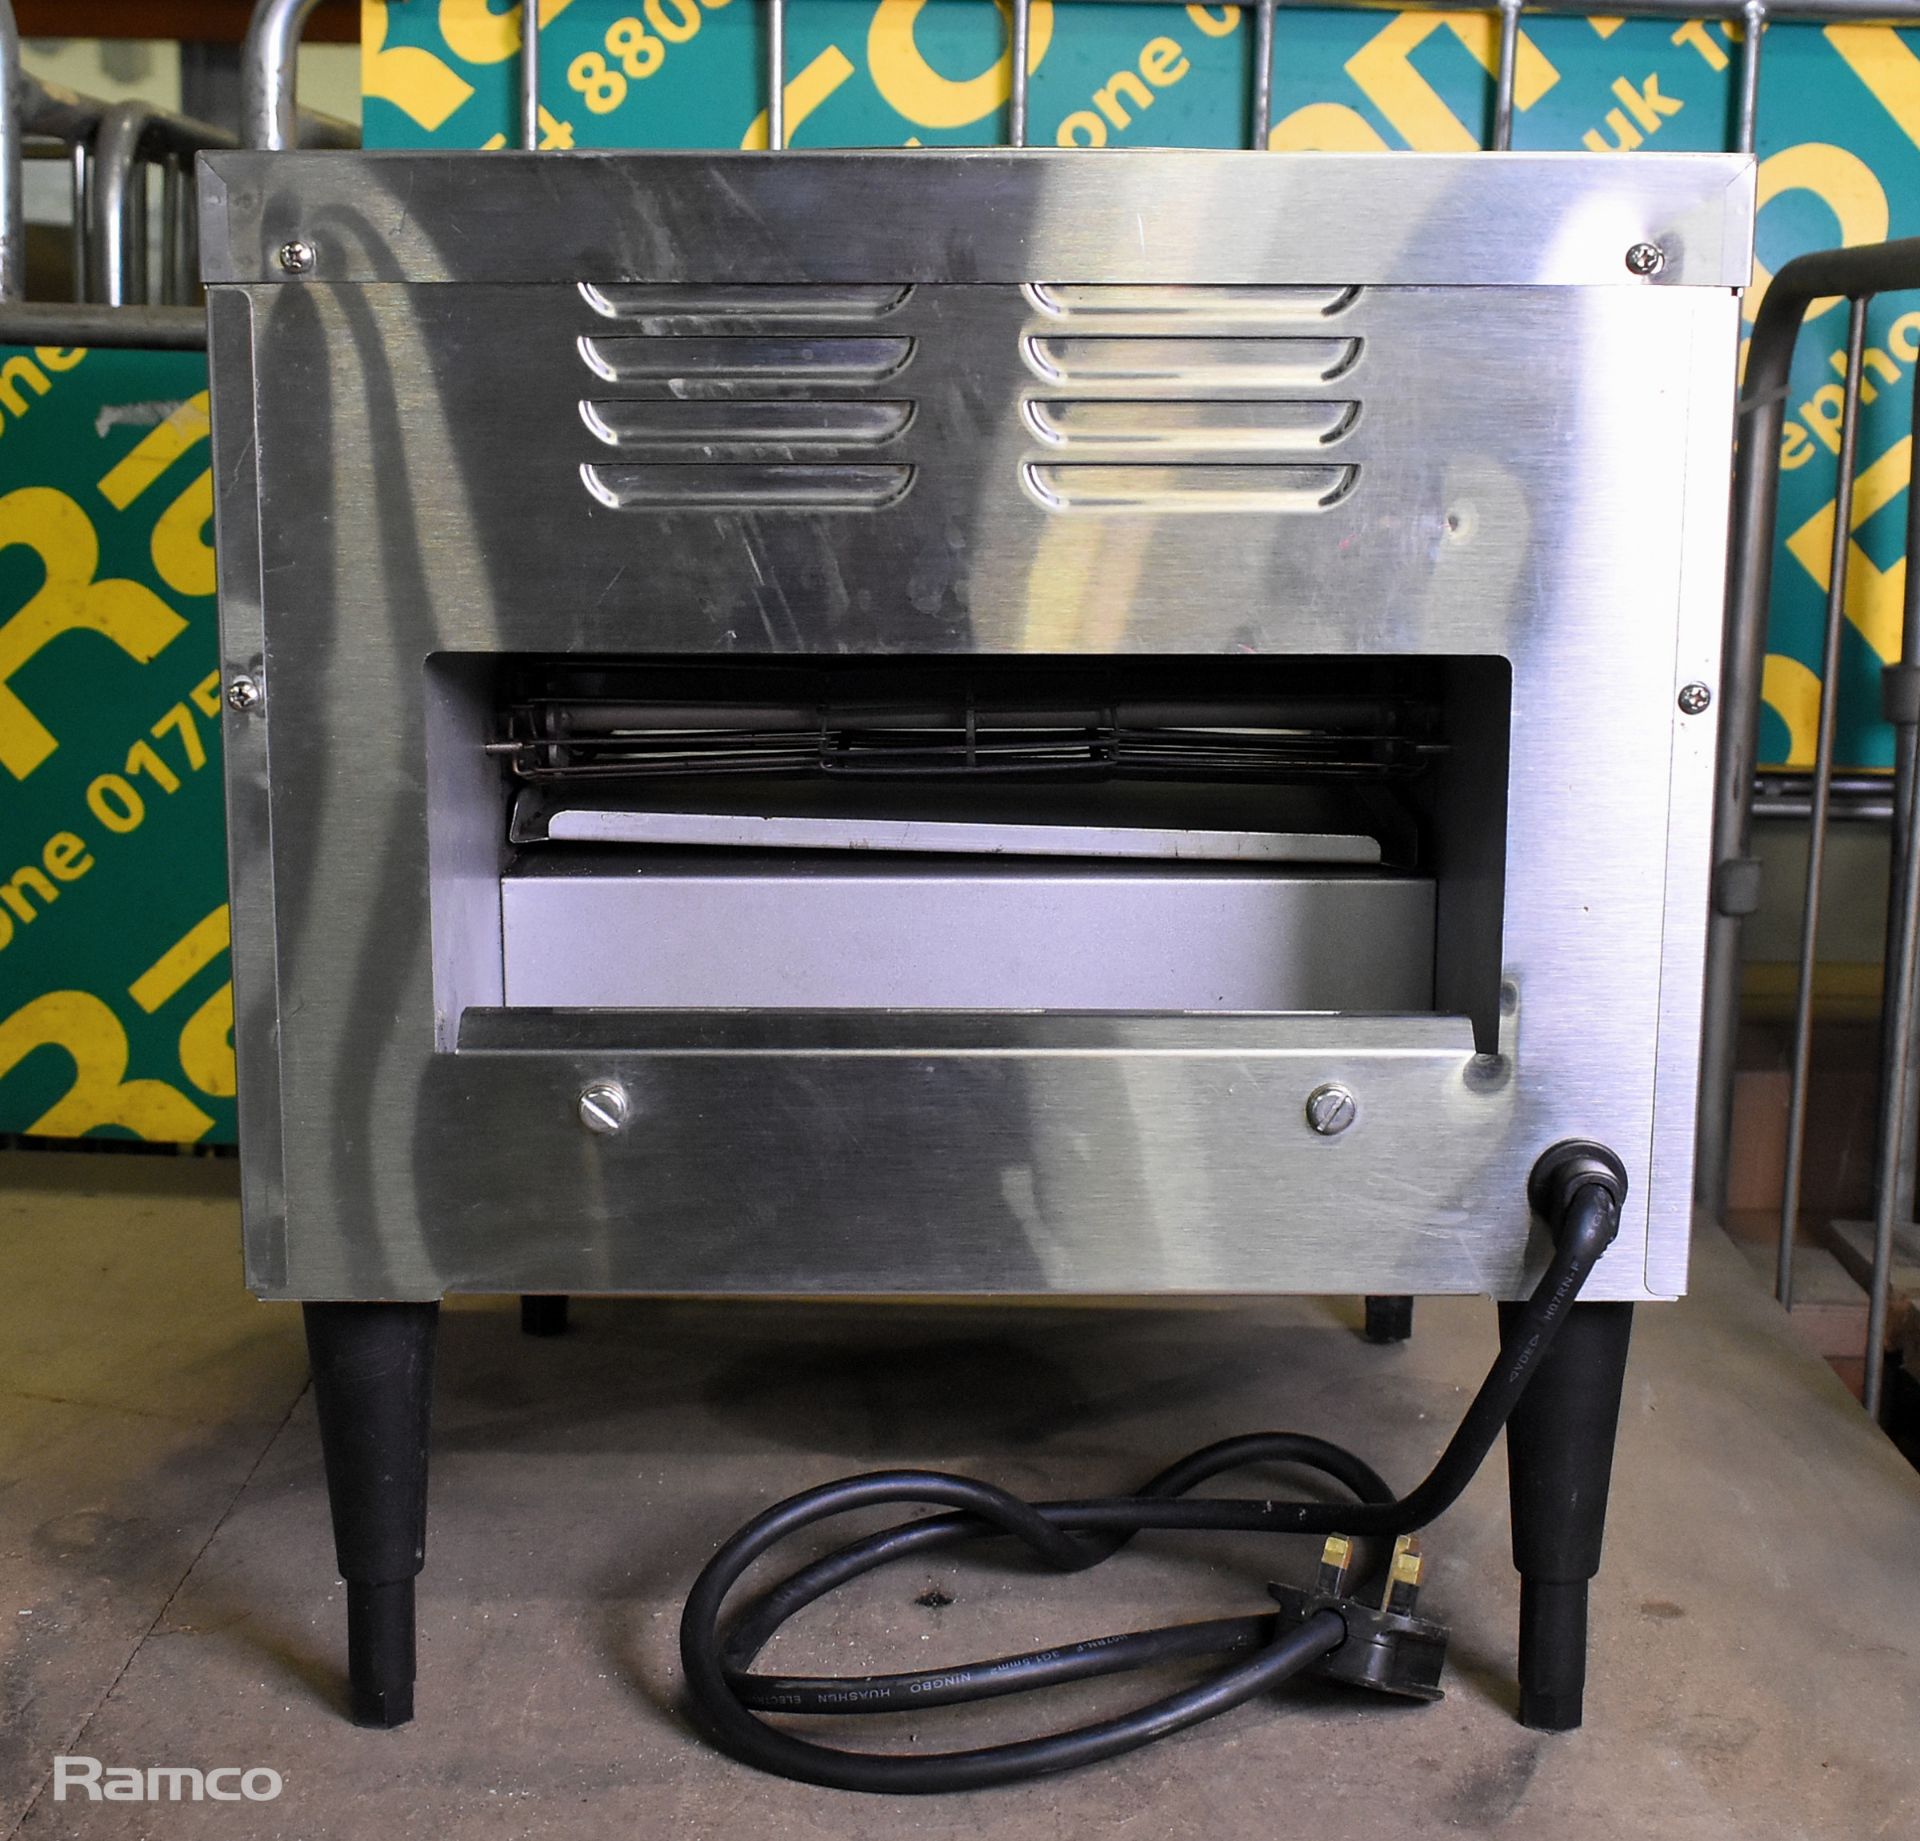 Chefmaster stainless steel conveyor toaster - Image 5 of 6